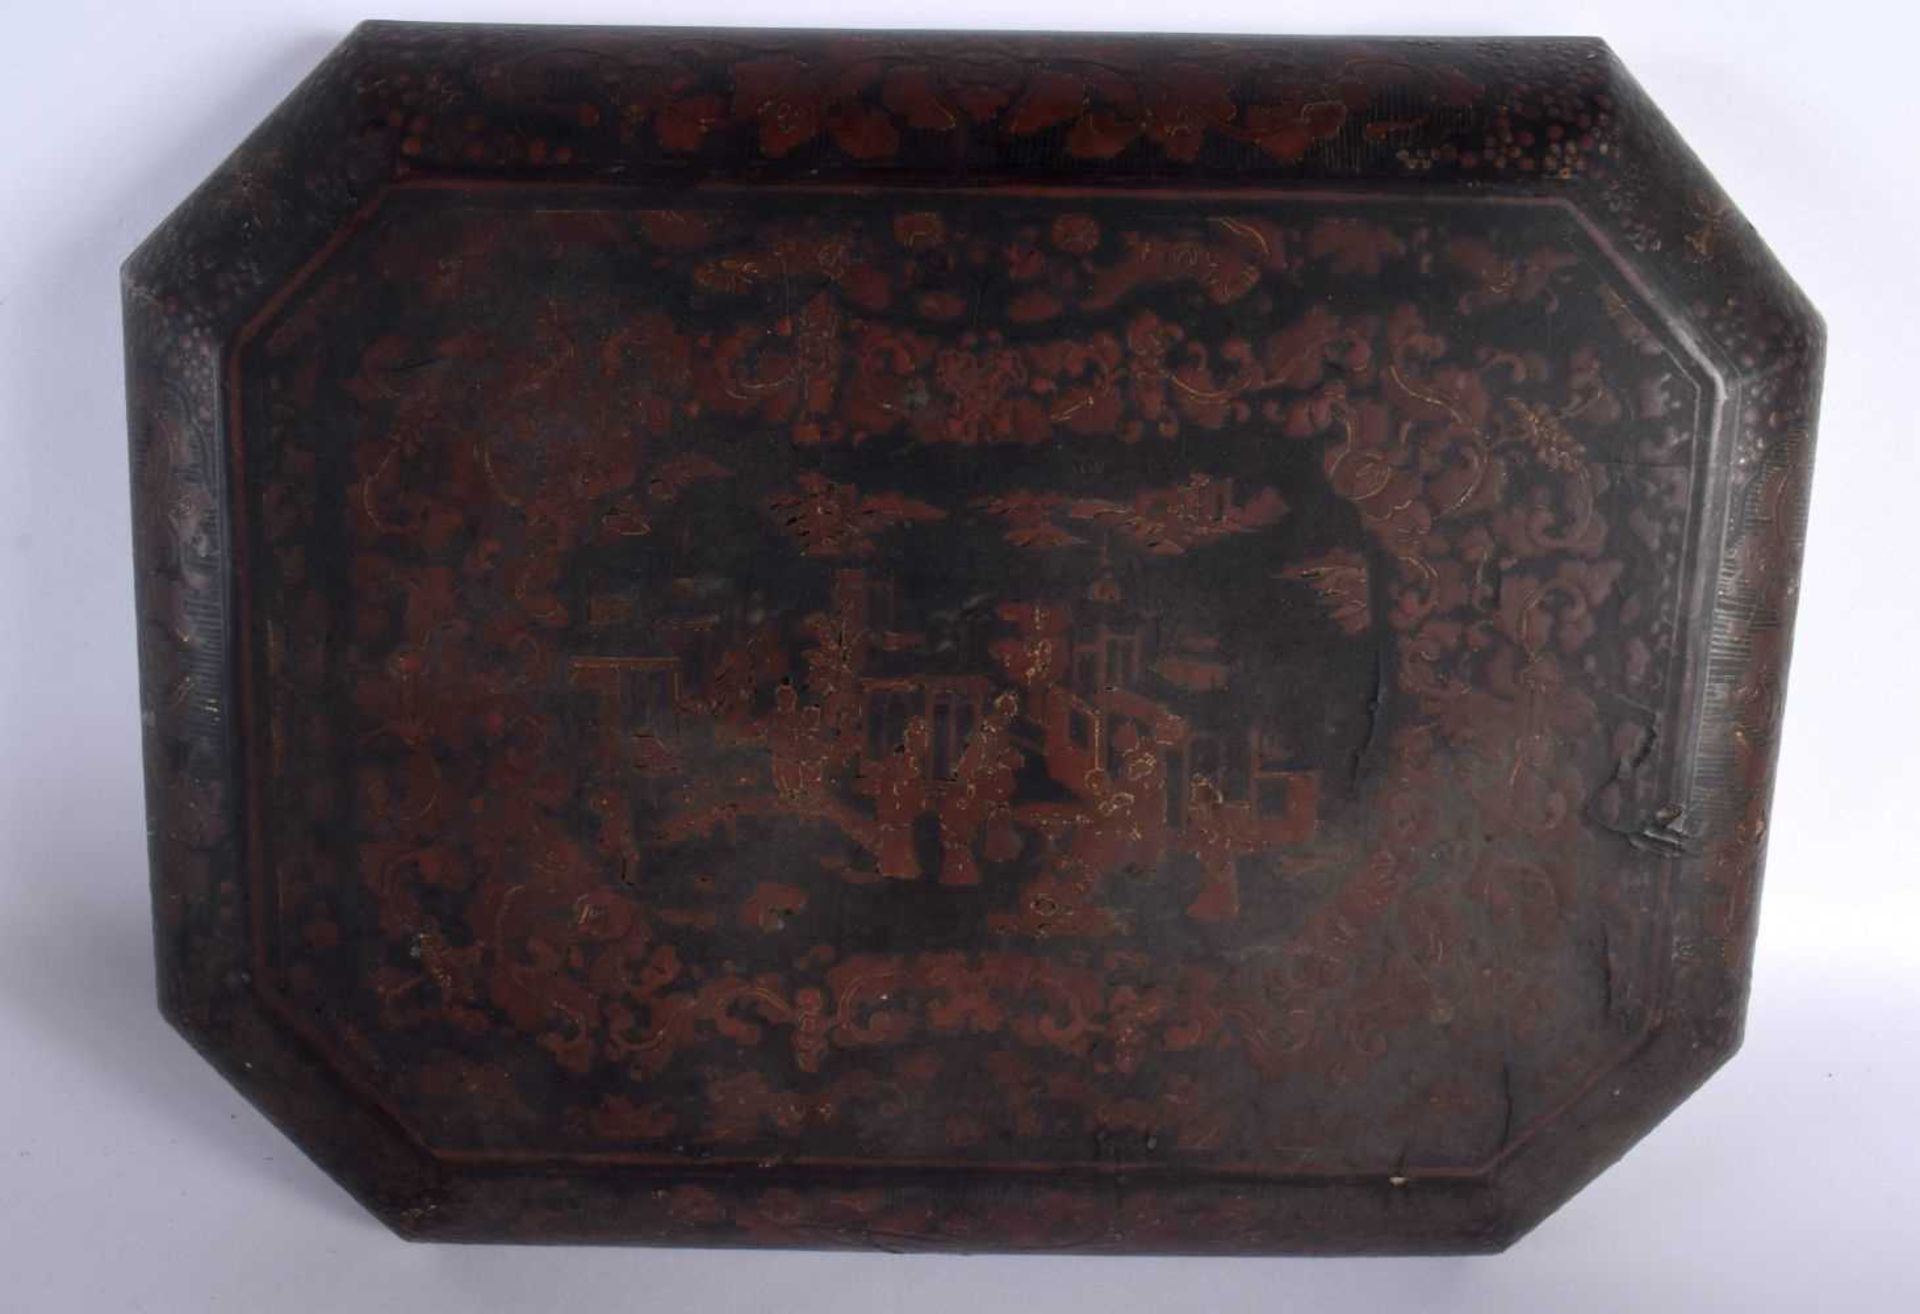 A LATE 18TH/19TH CENTURY CHINESE EXPORT RED AND BLACK LACQUER CASKET painted with Chinese figures in - Image 5 of 6